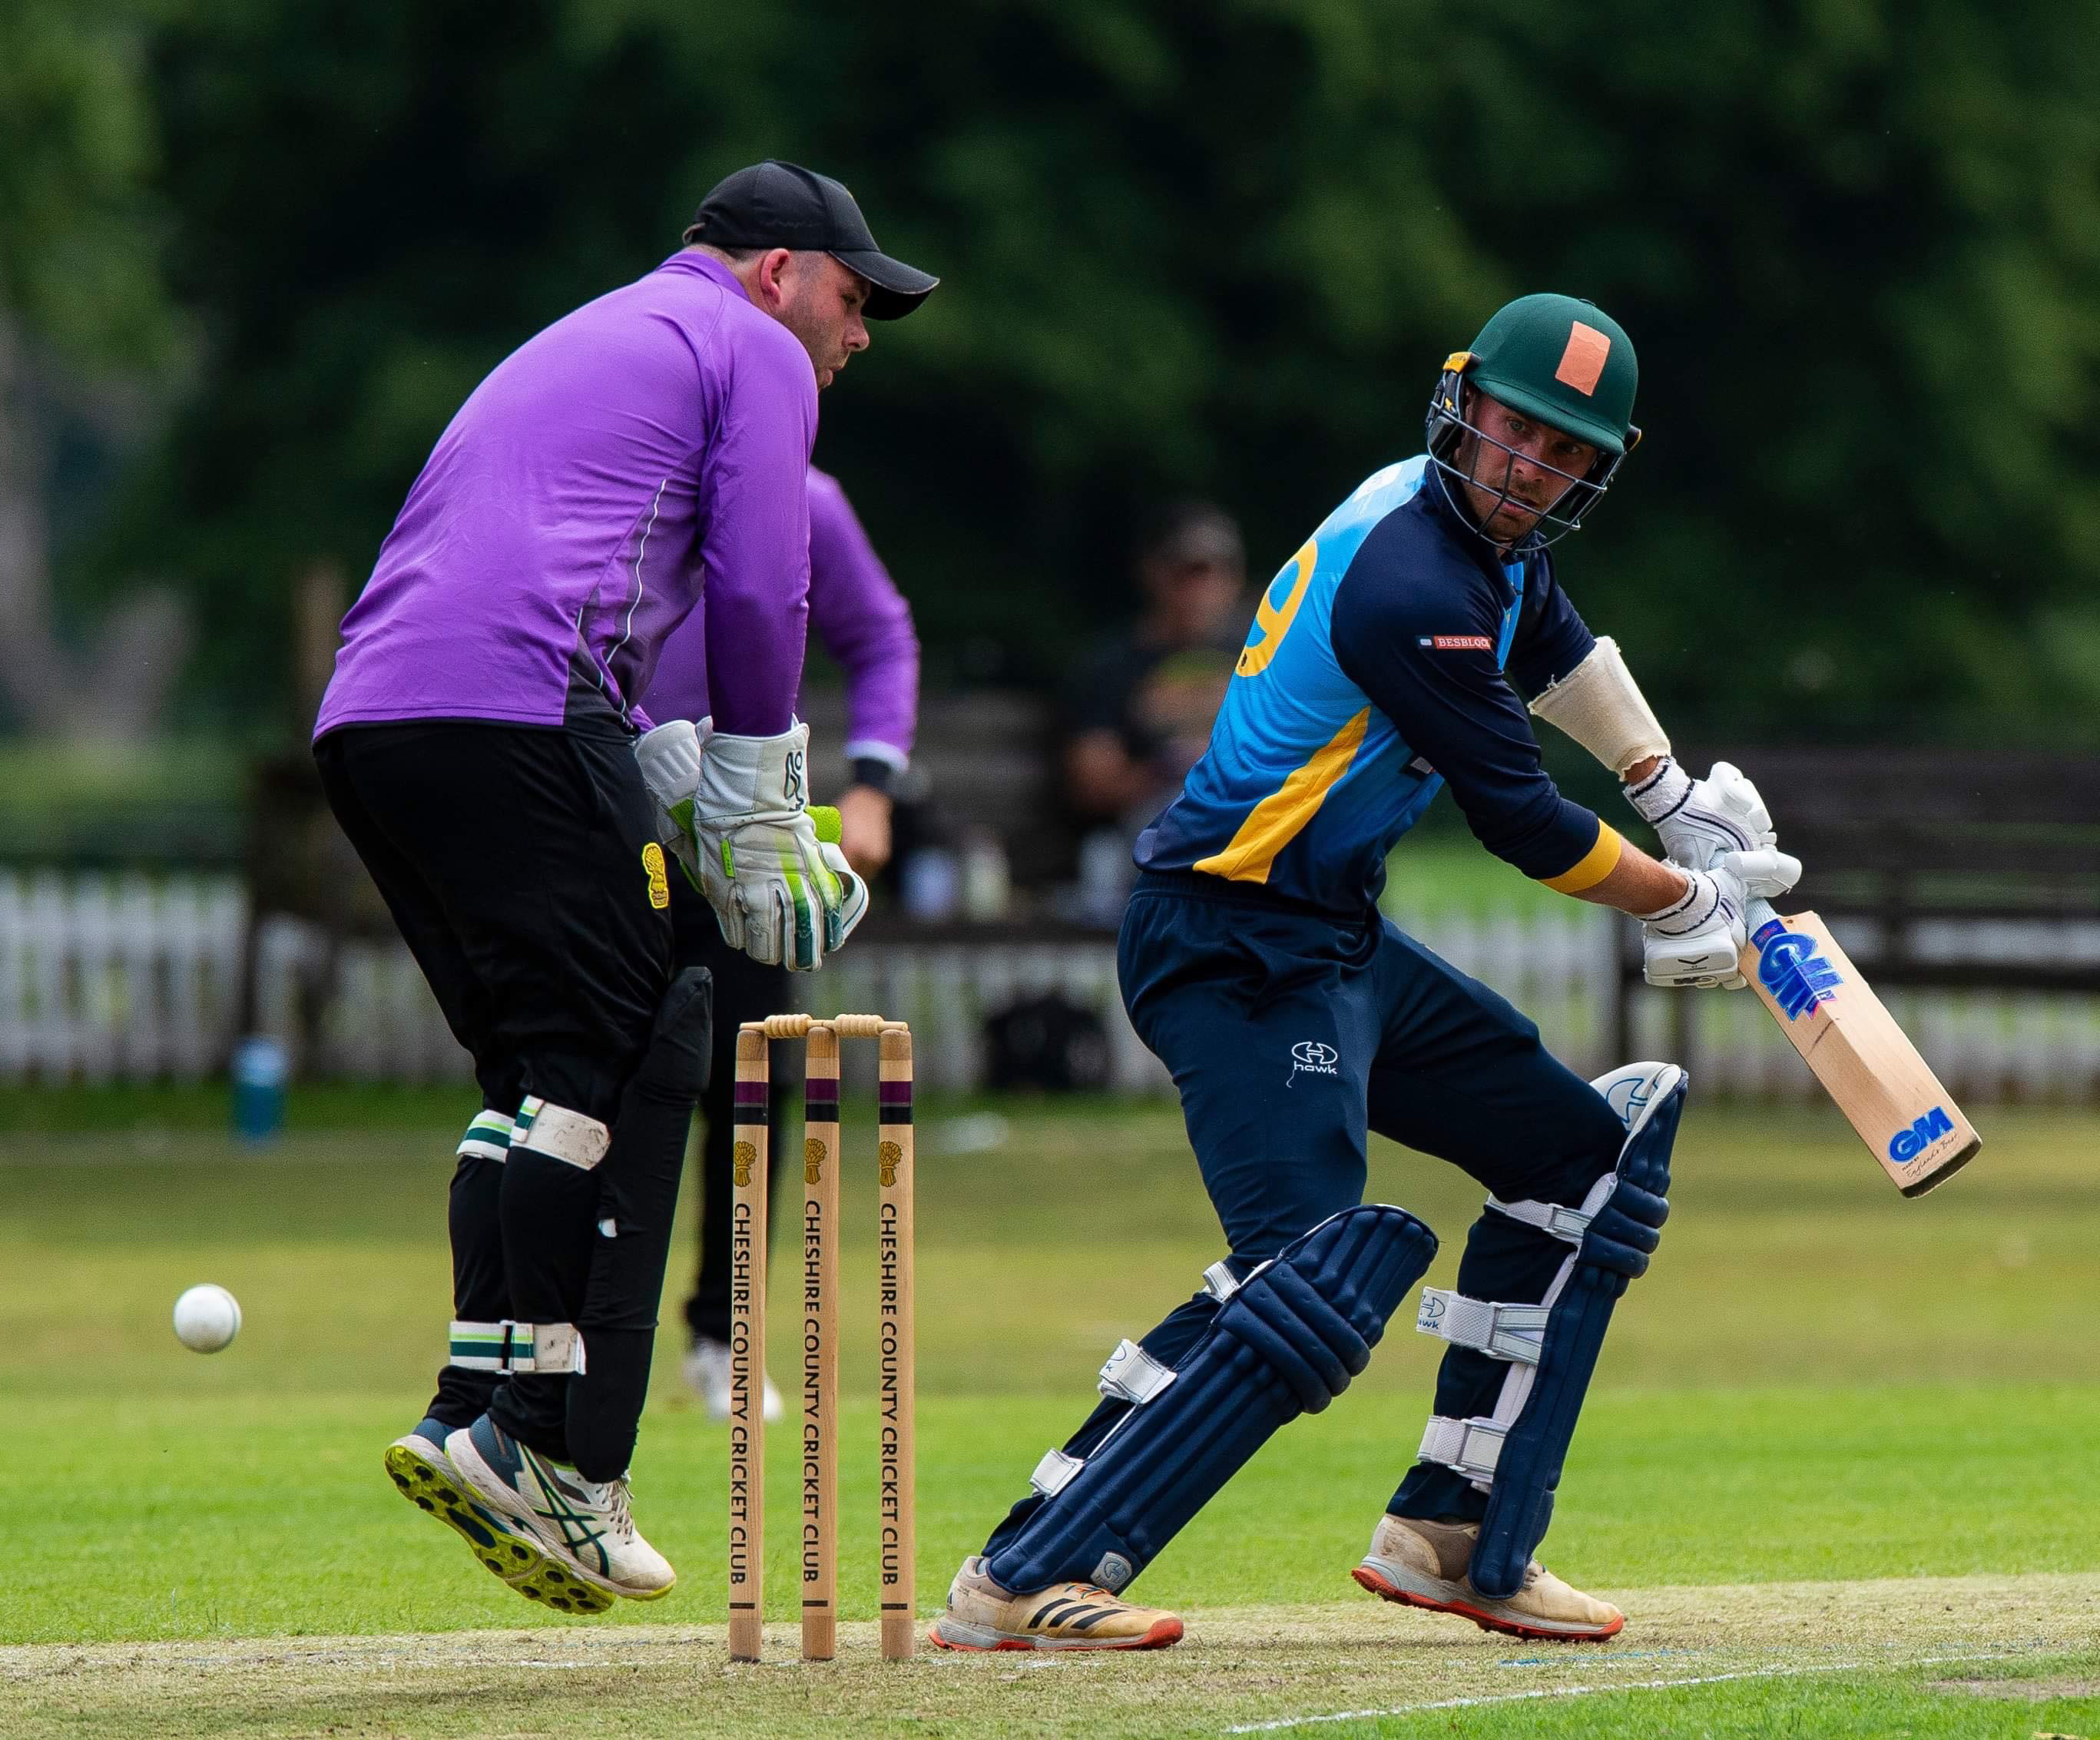 Washout sees Cheshire through to KO Quarter Finals